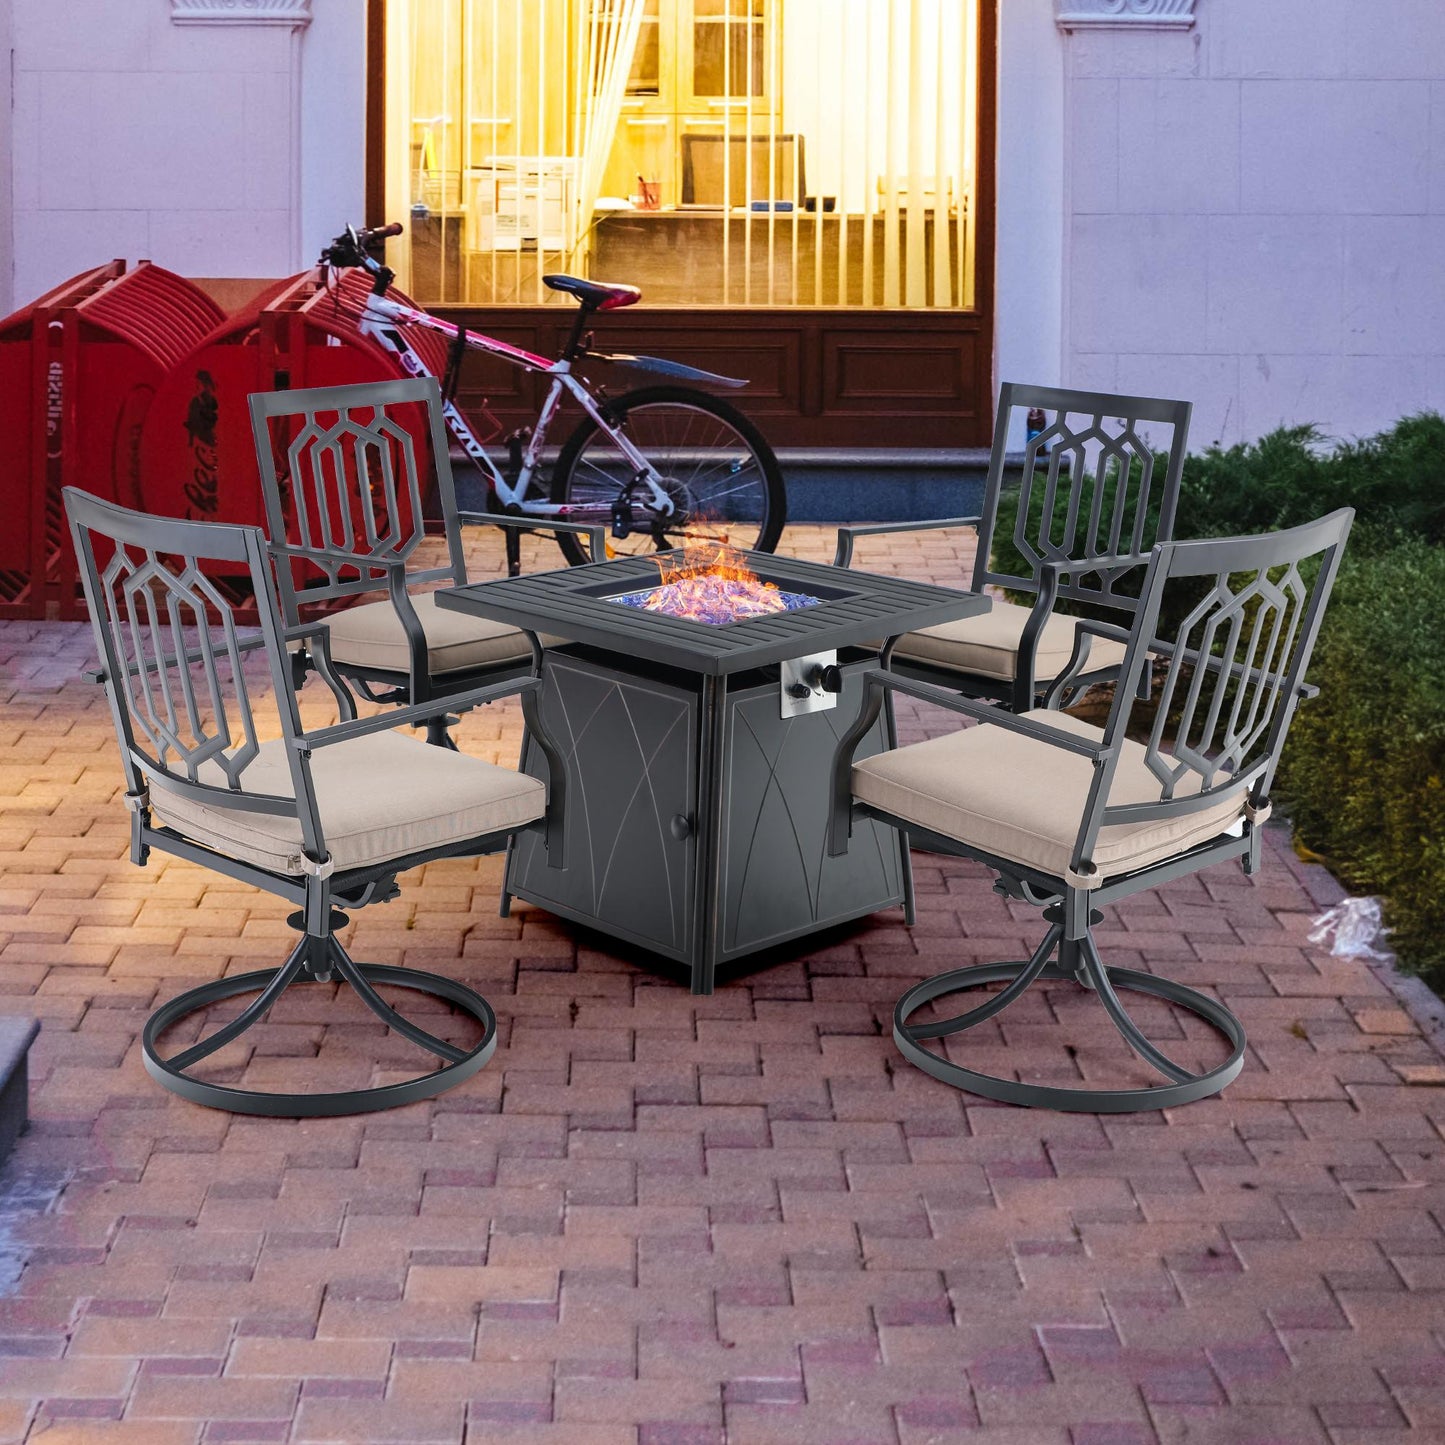 Sophia & William 5 Pcs Metal Patio Dining Set with Gas Fire Pit Table